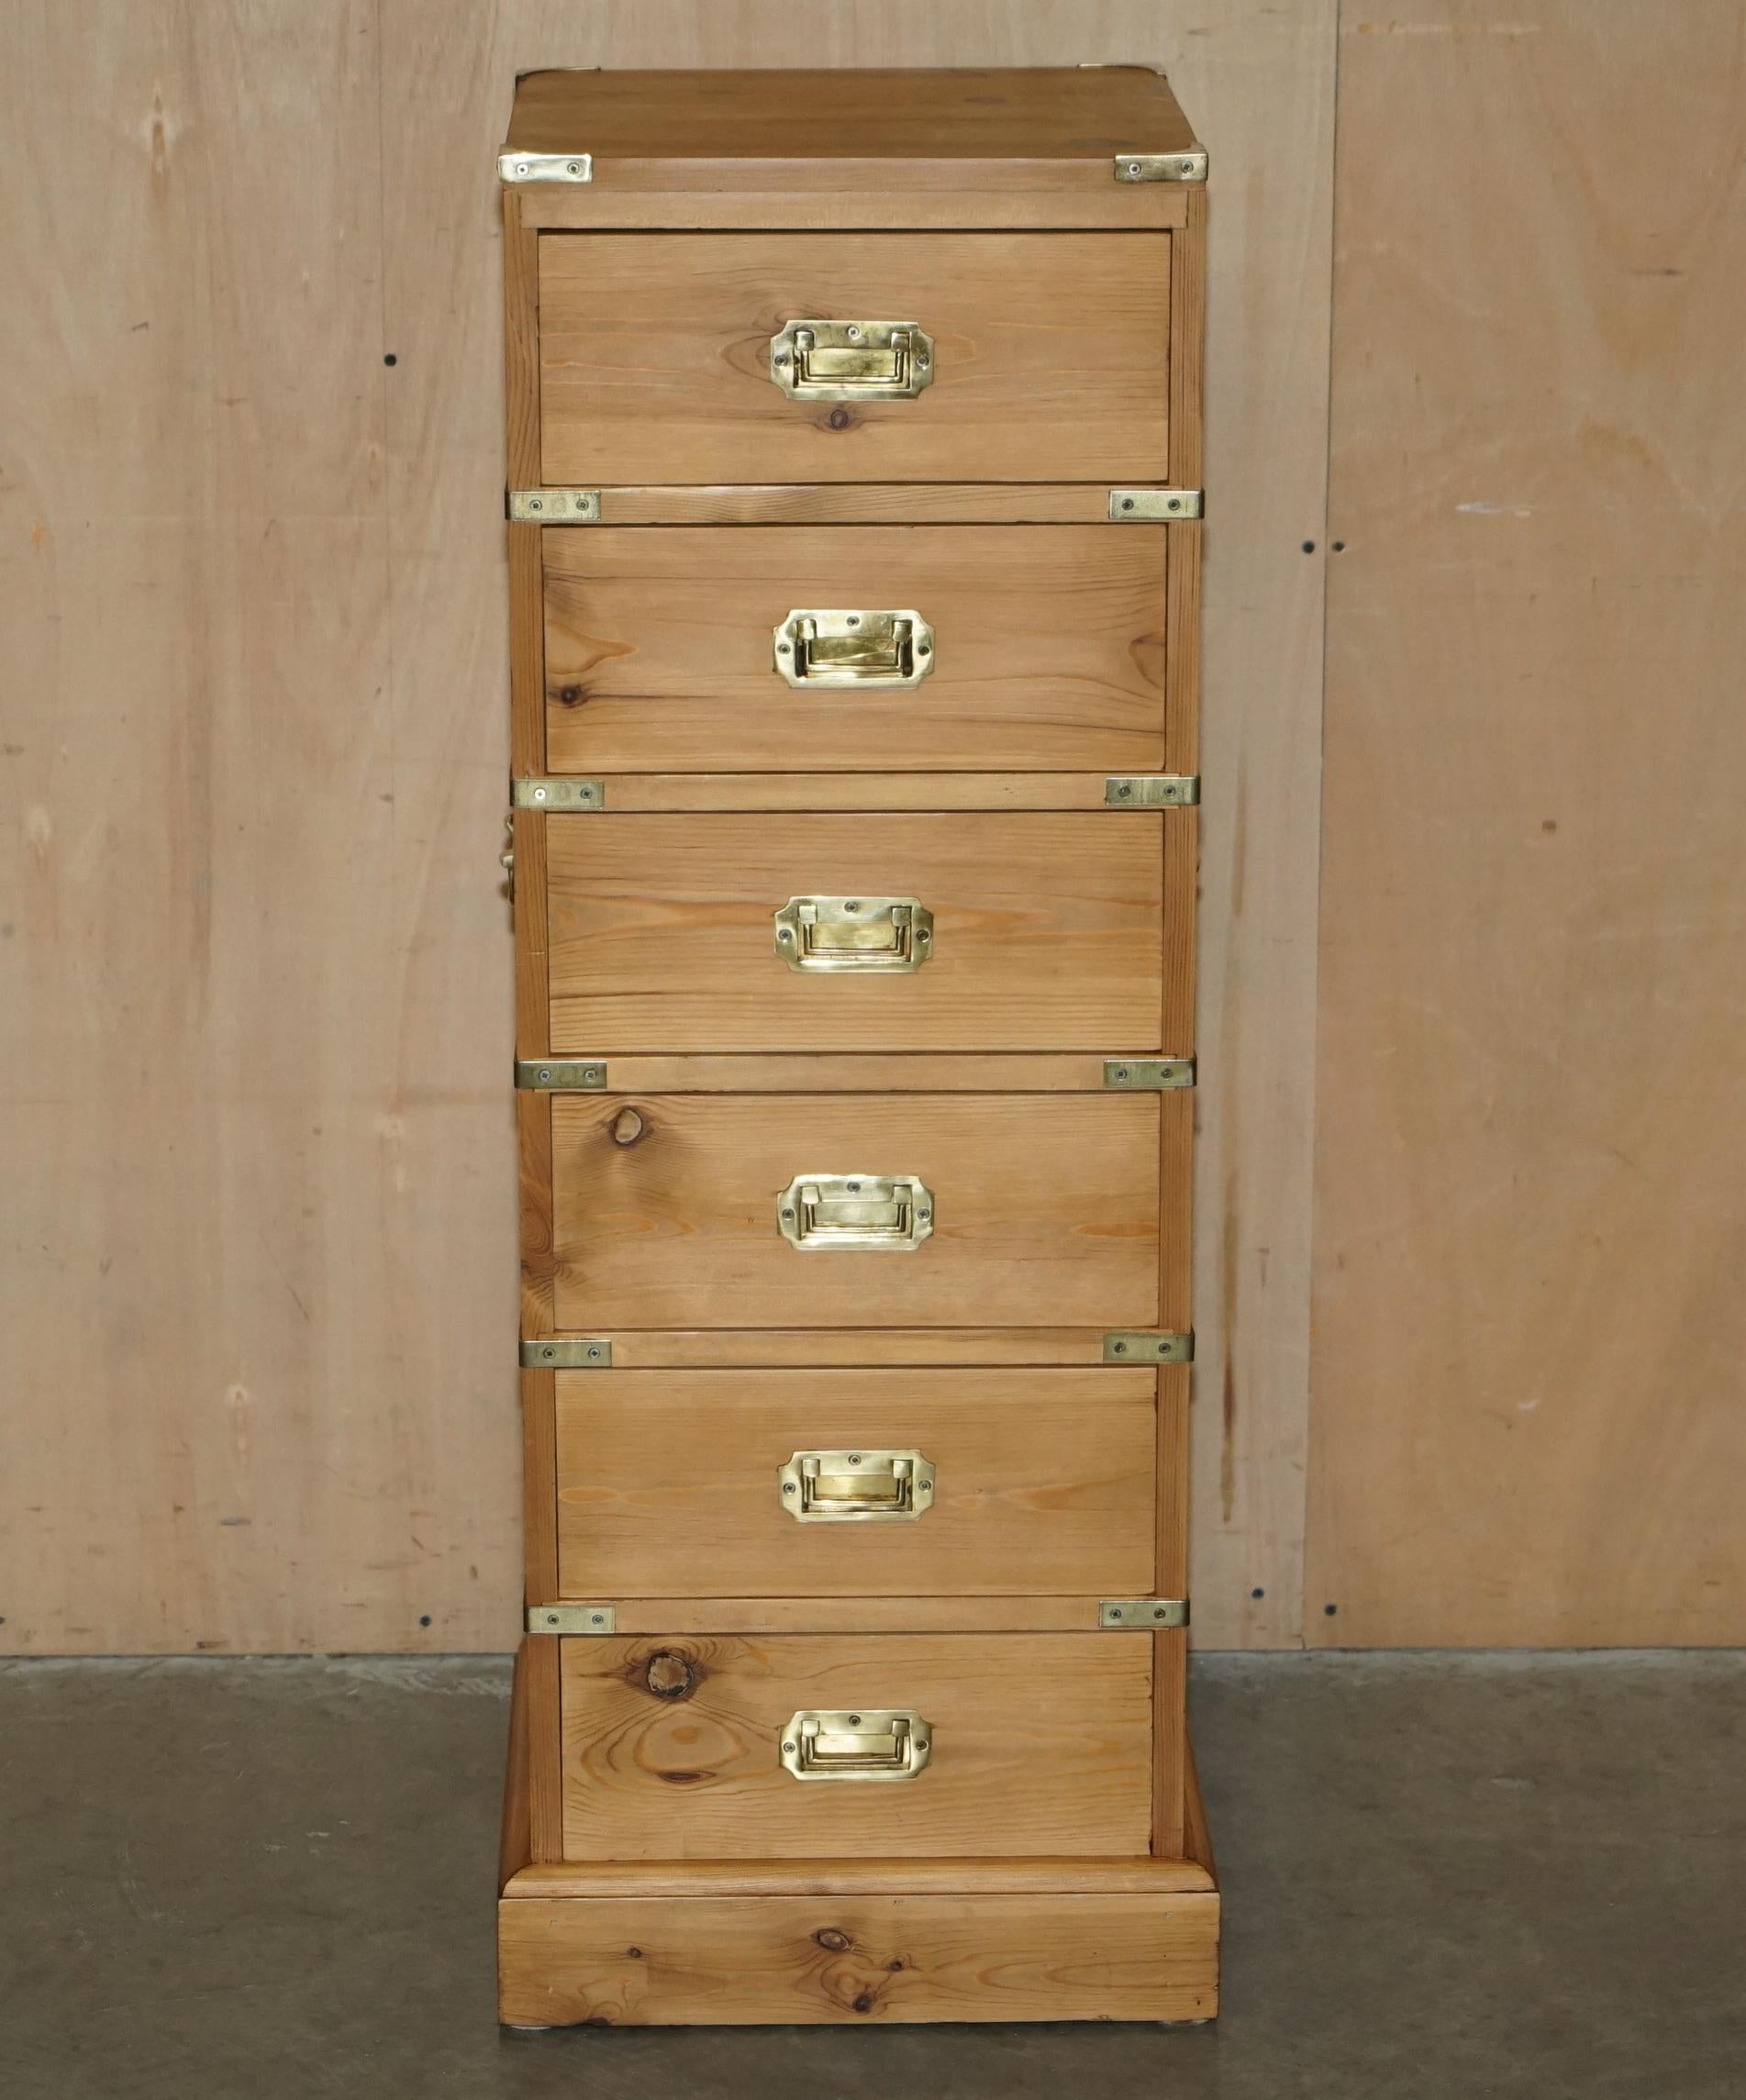 Royal House Antiques

Royal House Antiques is delighted to offer for sale this stunning, fully restored hand made in England Pine and Brass tallboy chest of drawers

Please note the delivery fee listed is just a guide, it covers within the M25 only